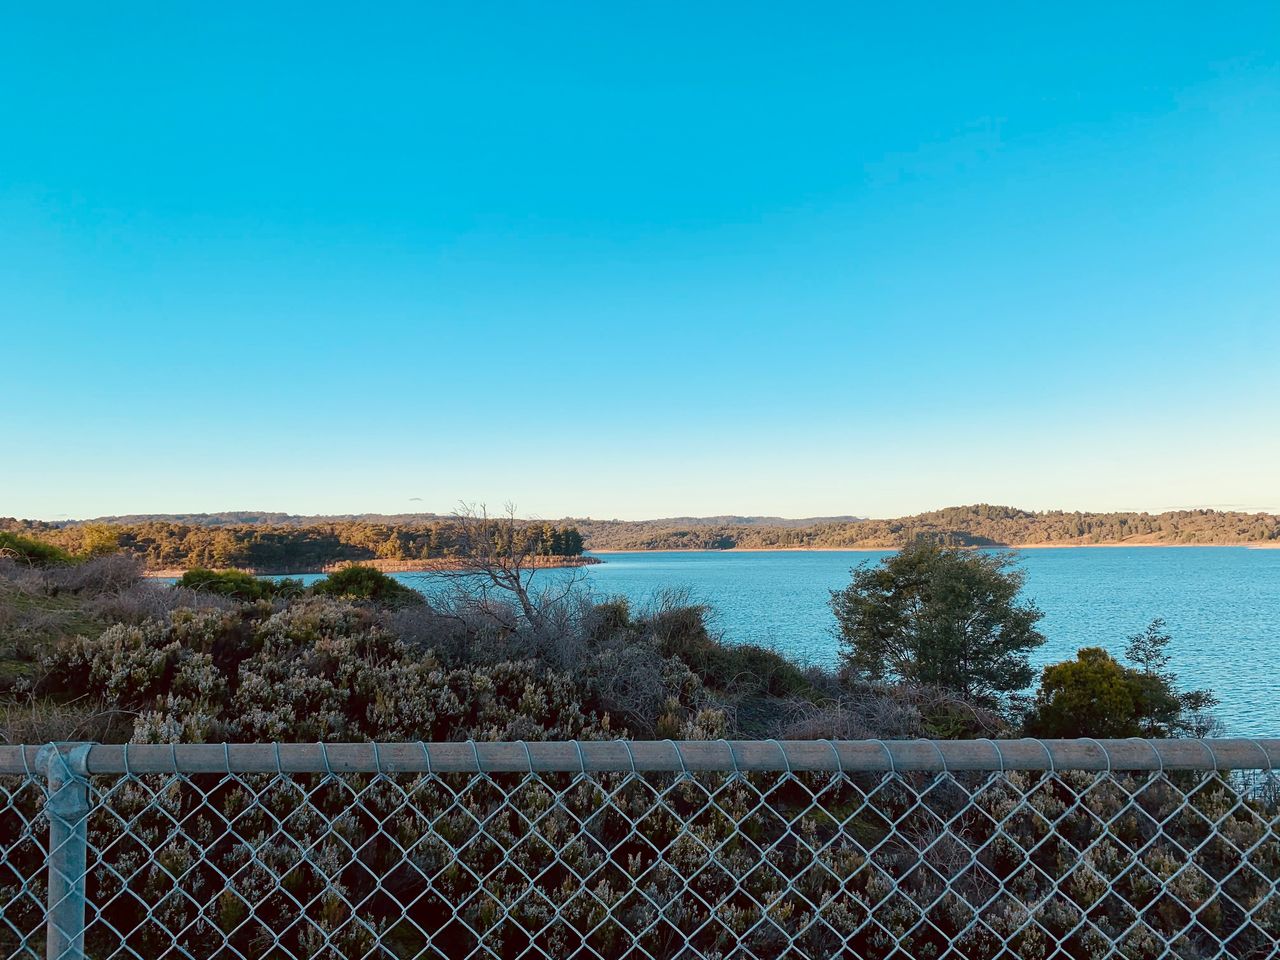 sky, sea, fence, nature, horizon, water, blue, clear sky, coast, no people, scenics - nature, morning, reflection, landscape, tranquility, tranquil scene, shore, security, mountain, land, environment, day, copy space, plant, beauty in nature, tree, dusk, protection, outdoors, sunlight, ocean, cloud, chainlink fence, wire